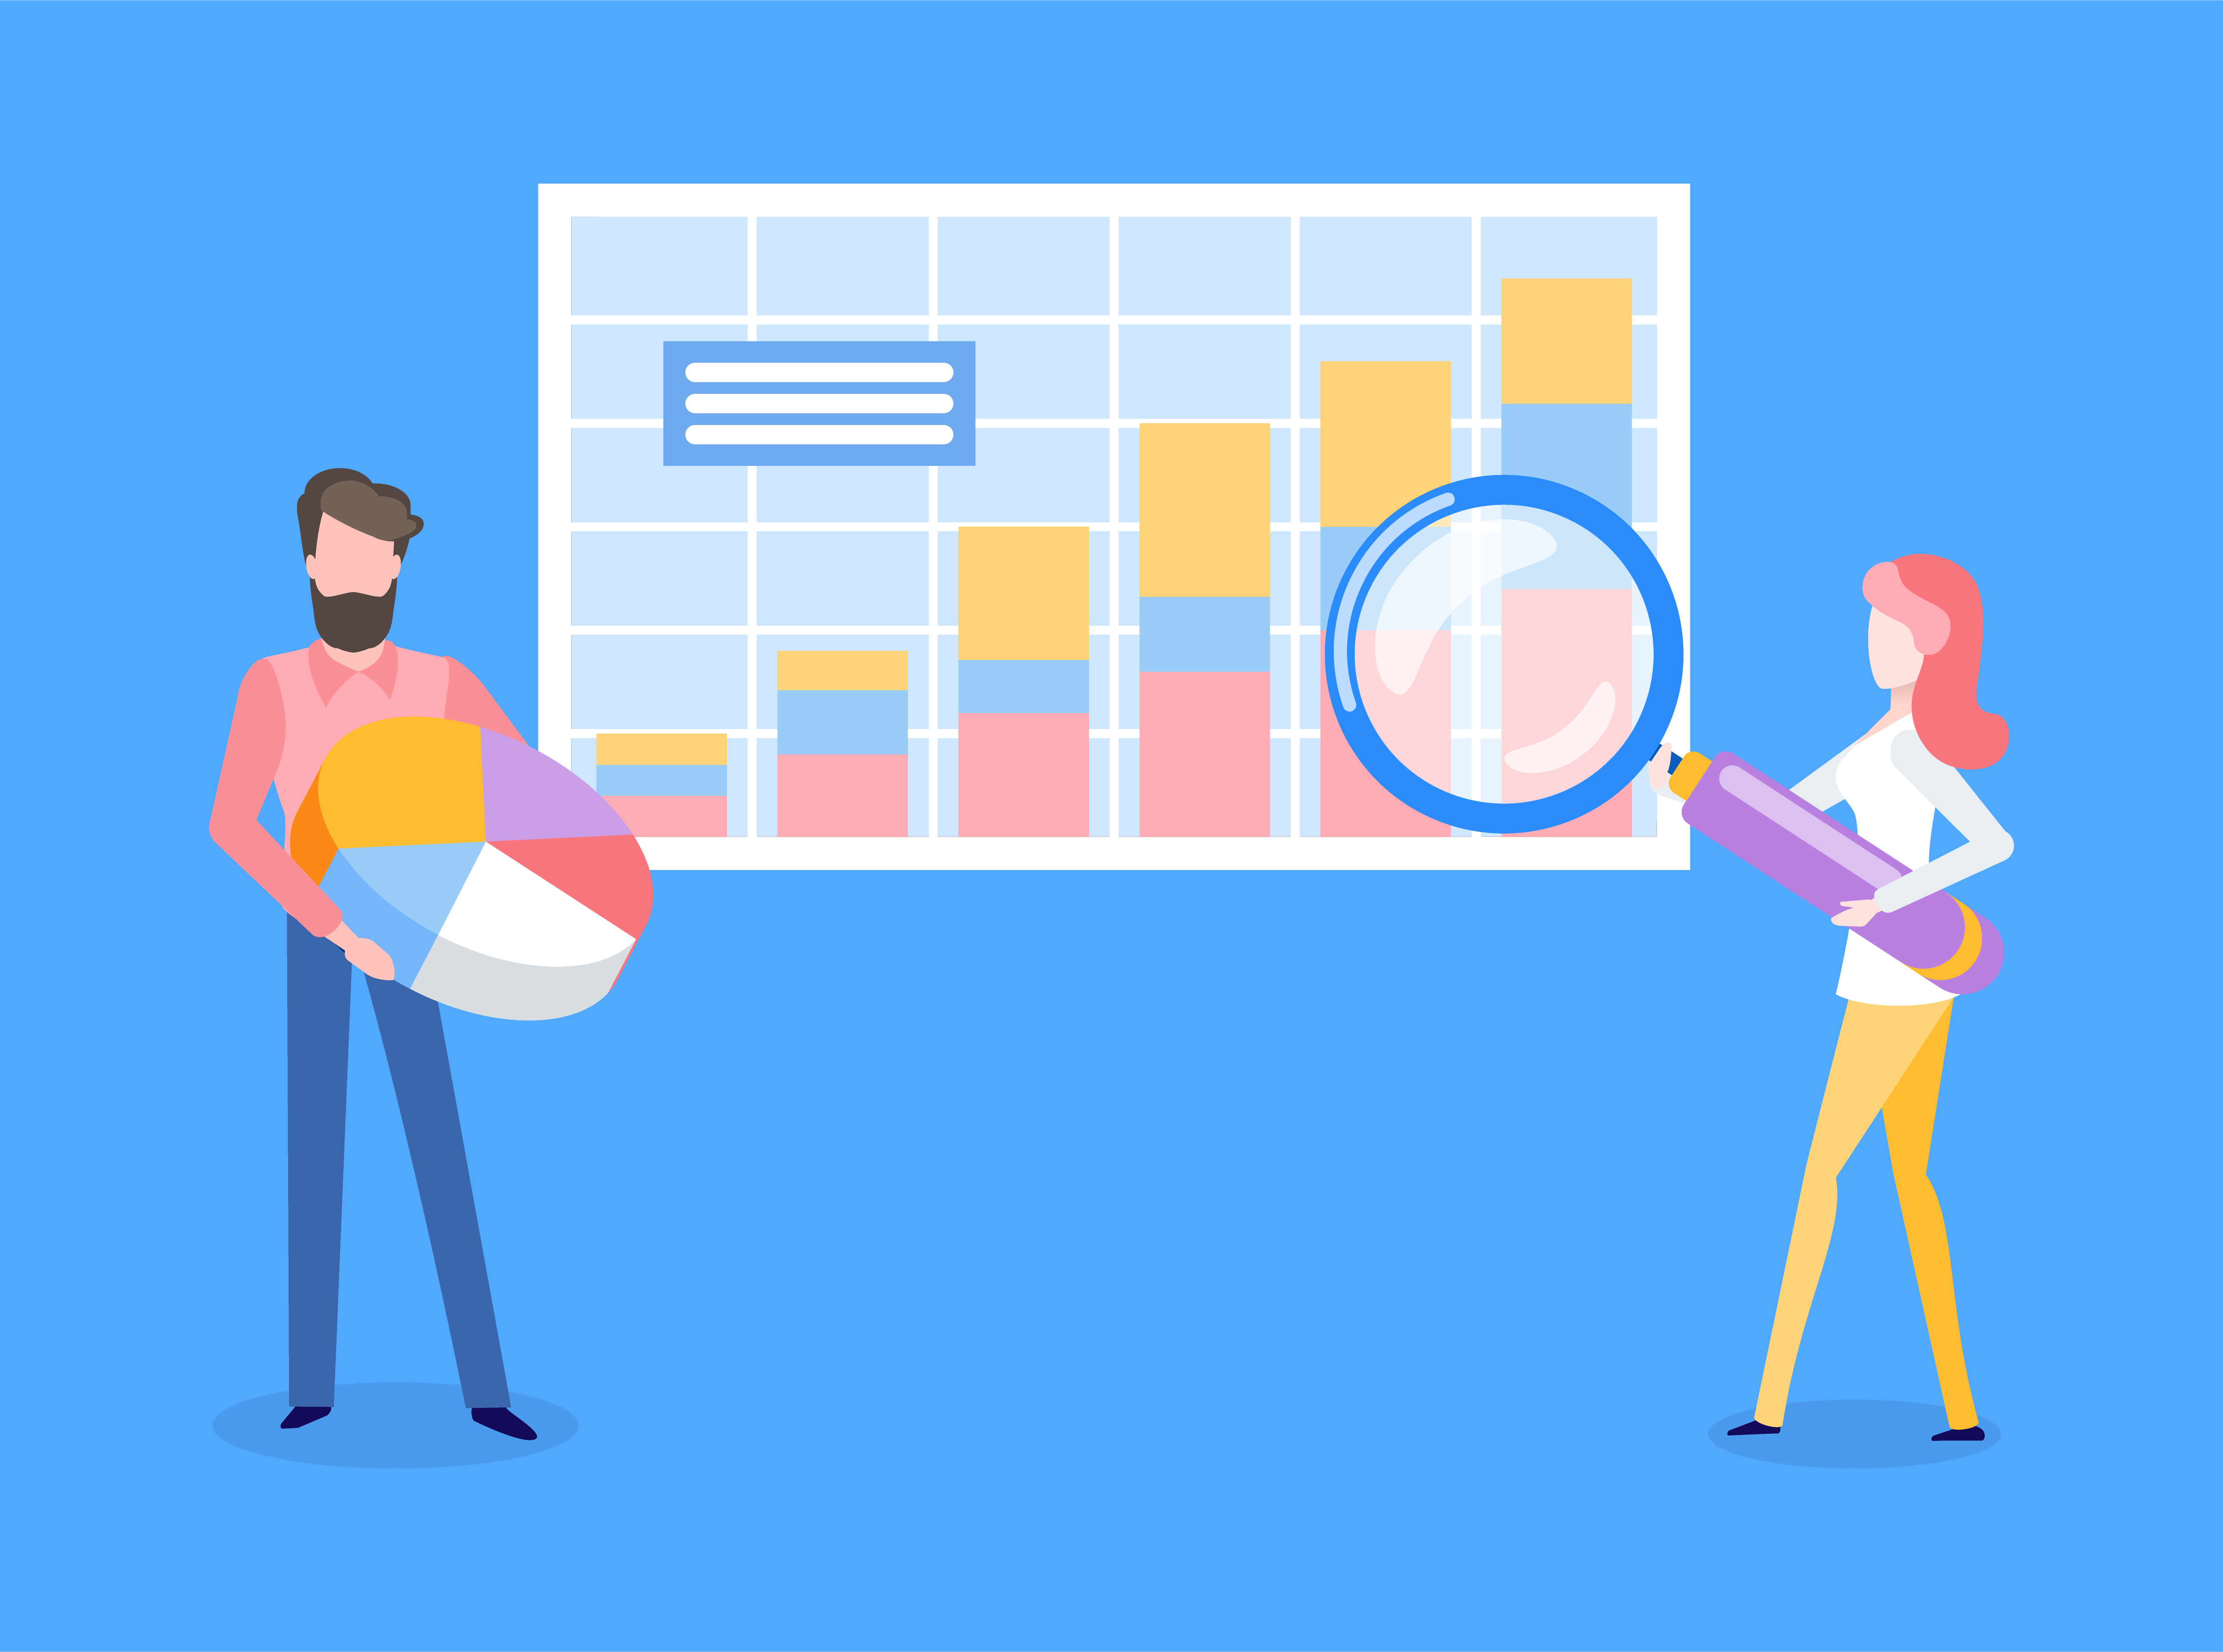 People working on business analysis on data vector. Flowchart on presentation presented by man and woman, male worker holding pie diagram, lady with glass. Man and Woman with Infographics on Board Analyze